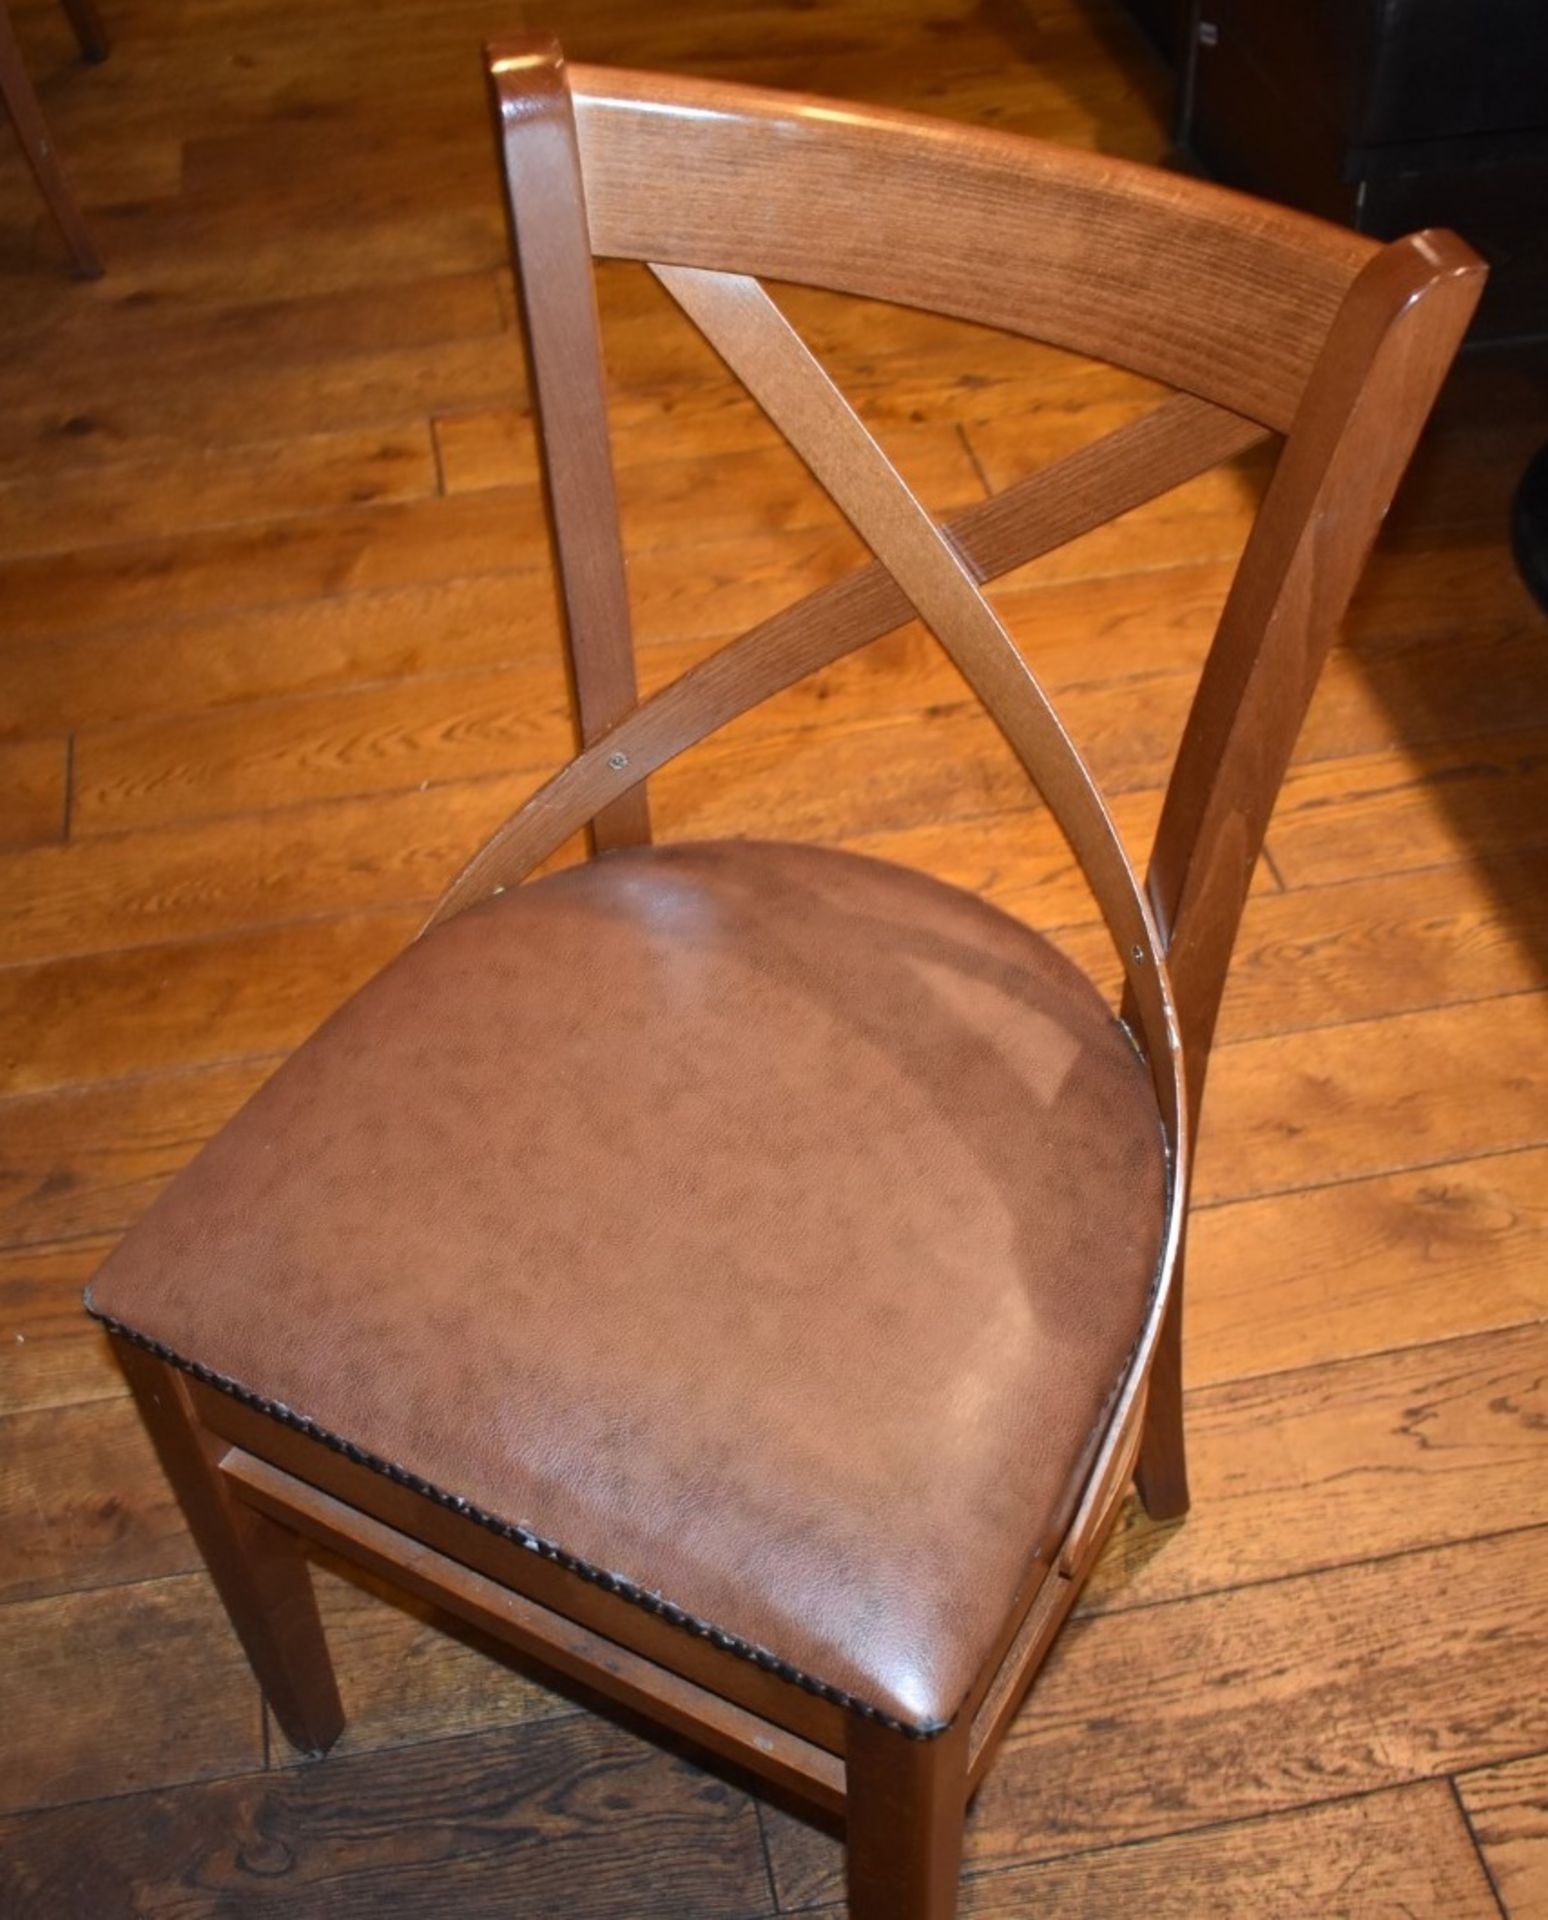 6 x Restaurant Dining Chairs With Wooden Crossbacks and Faux Leather Brown Seat Pads - H84 x W45 cms - Image 3 of 4